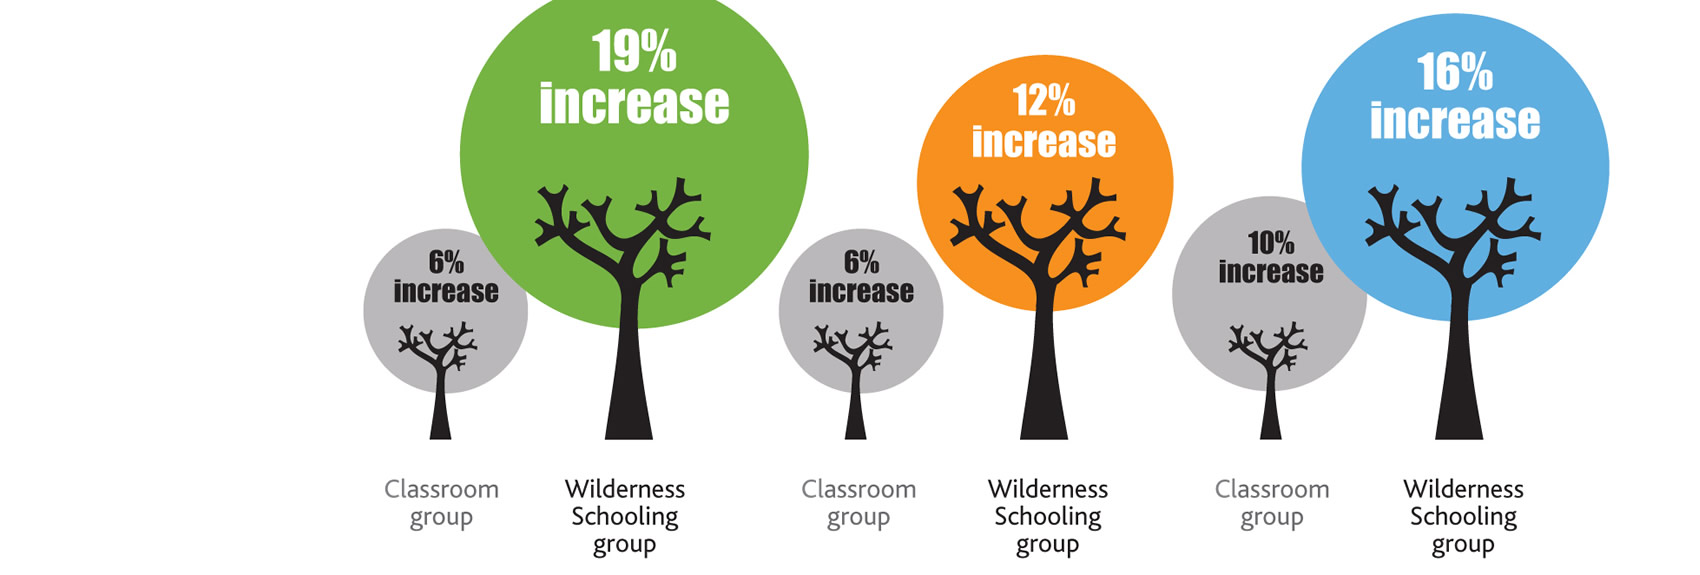 Impact of Wilderness Schooling on attainment